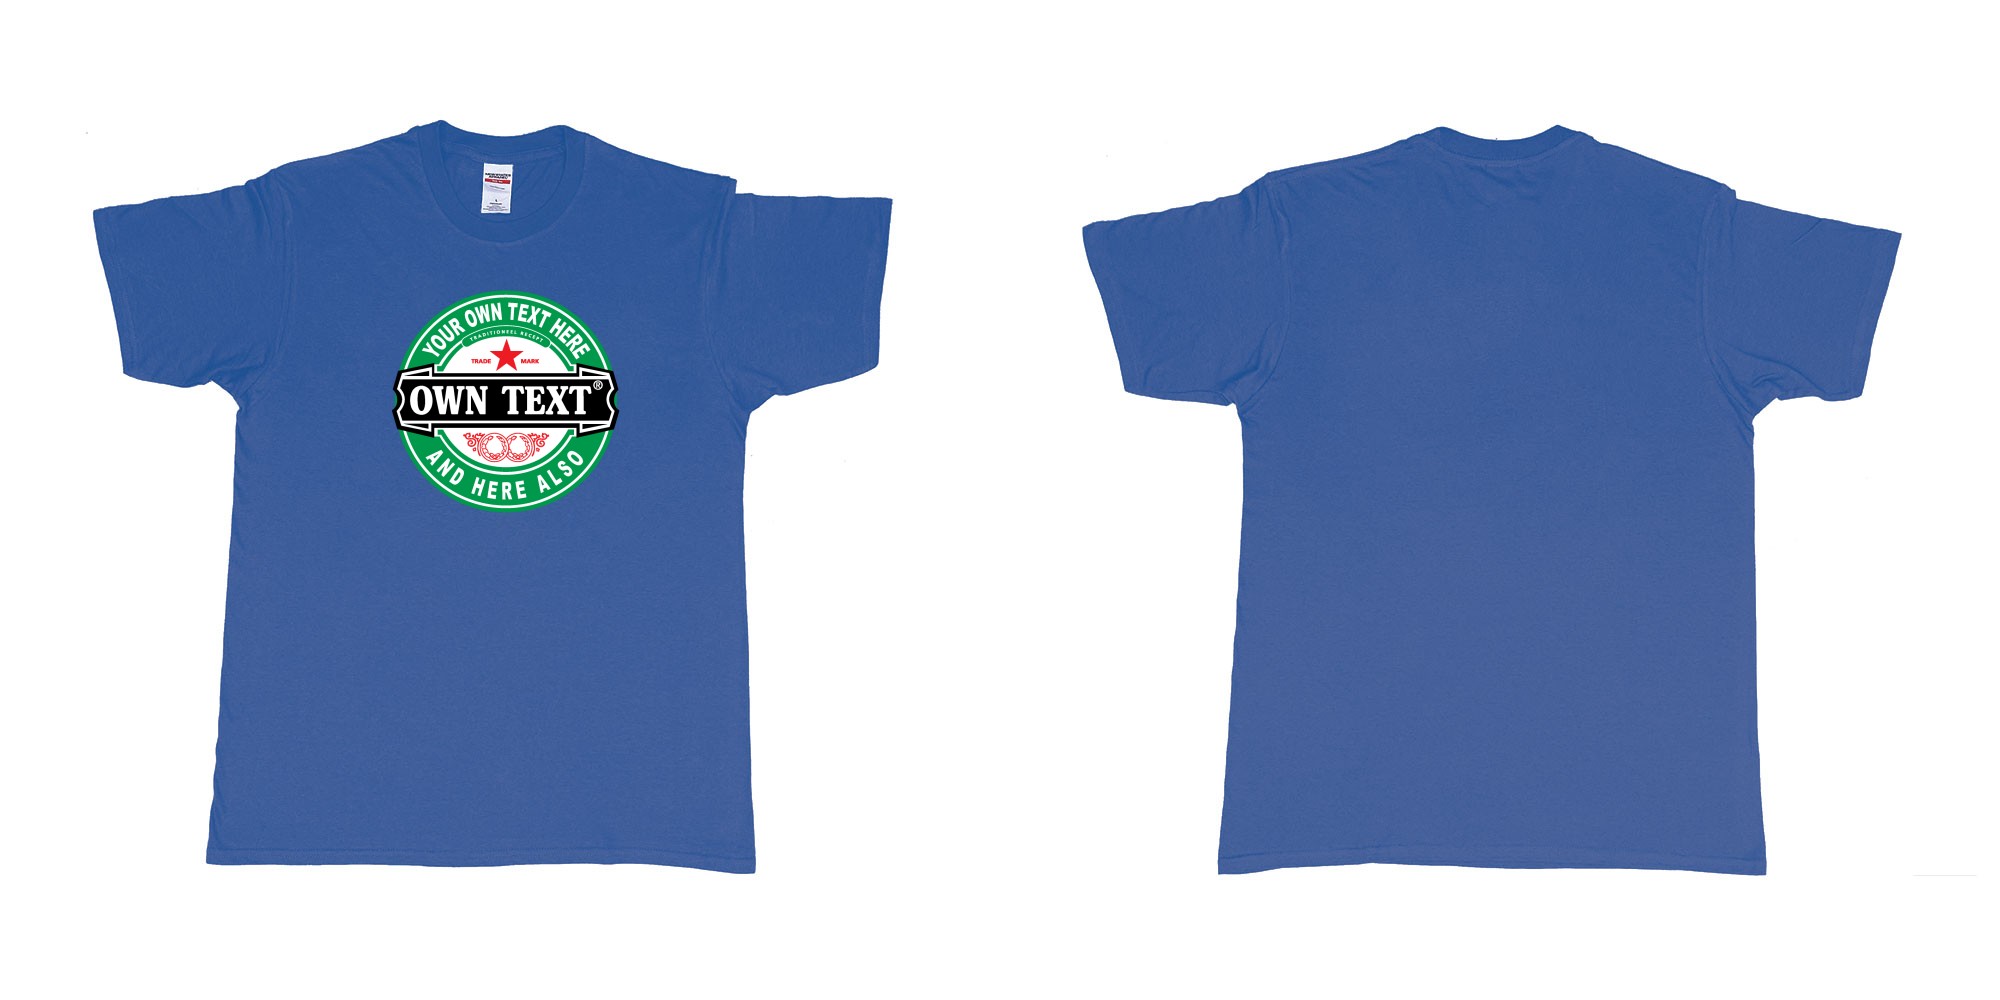 Custom tshirt design Heineken beer in fabric color royal-blue choice your own text made in Bali by The Pirate Way